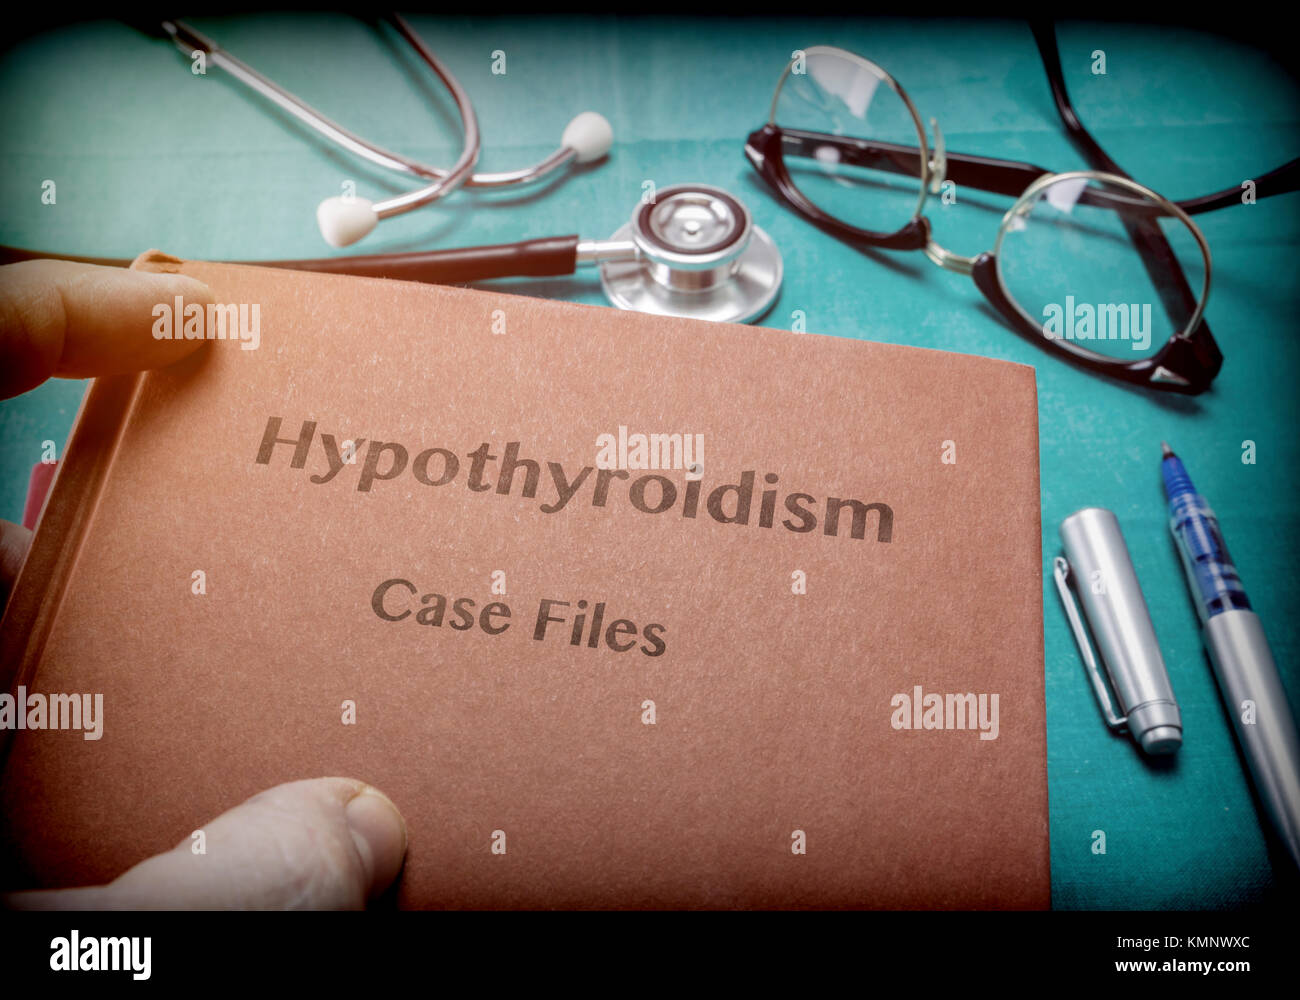 Doctor holds in its hands a book on the Hypothyroidism, conceptual image Stock Photo